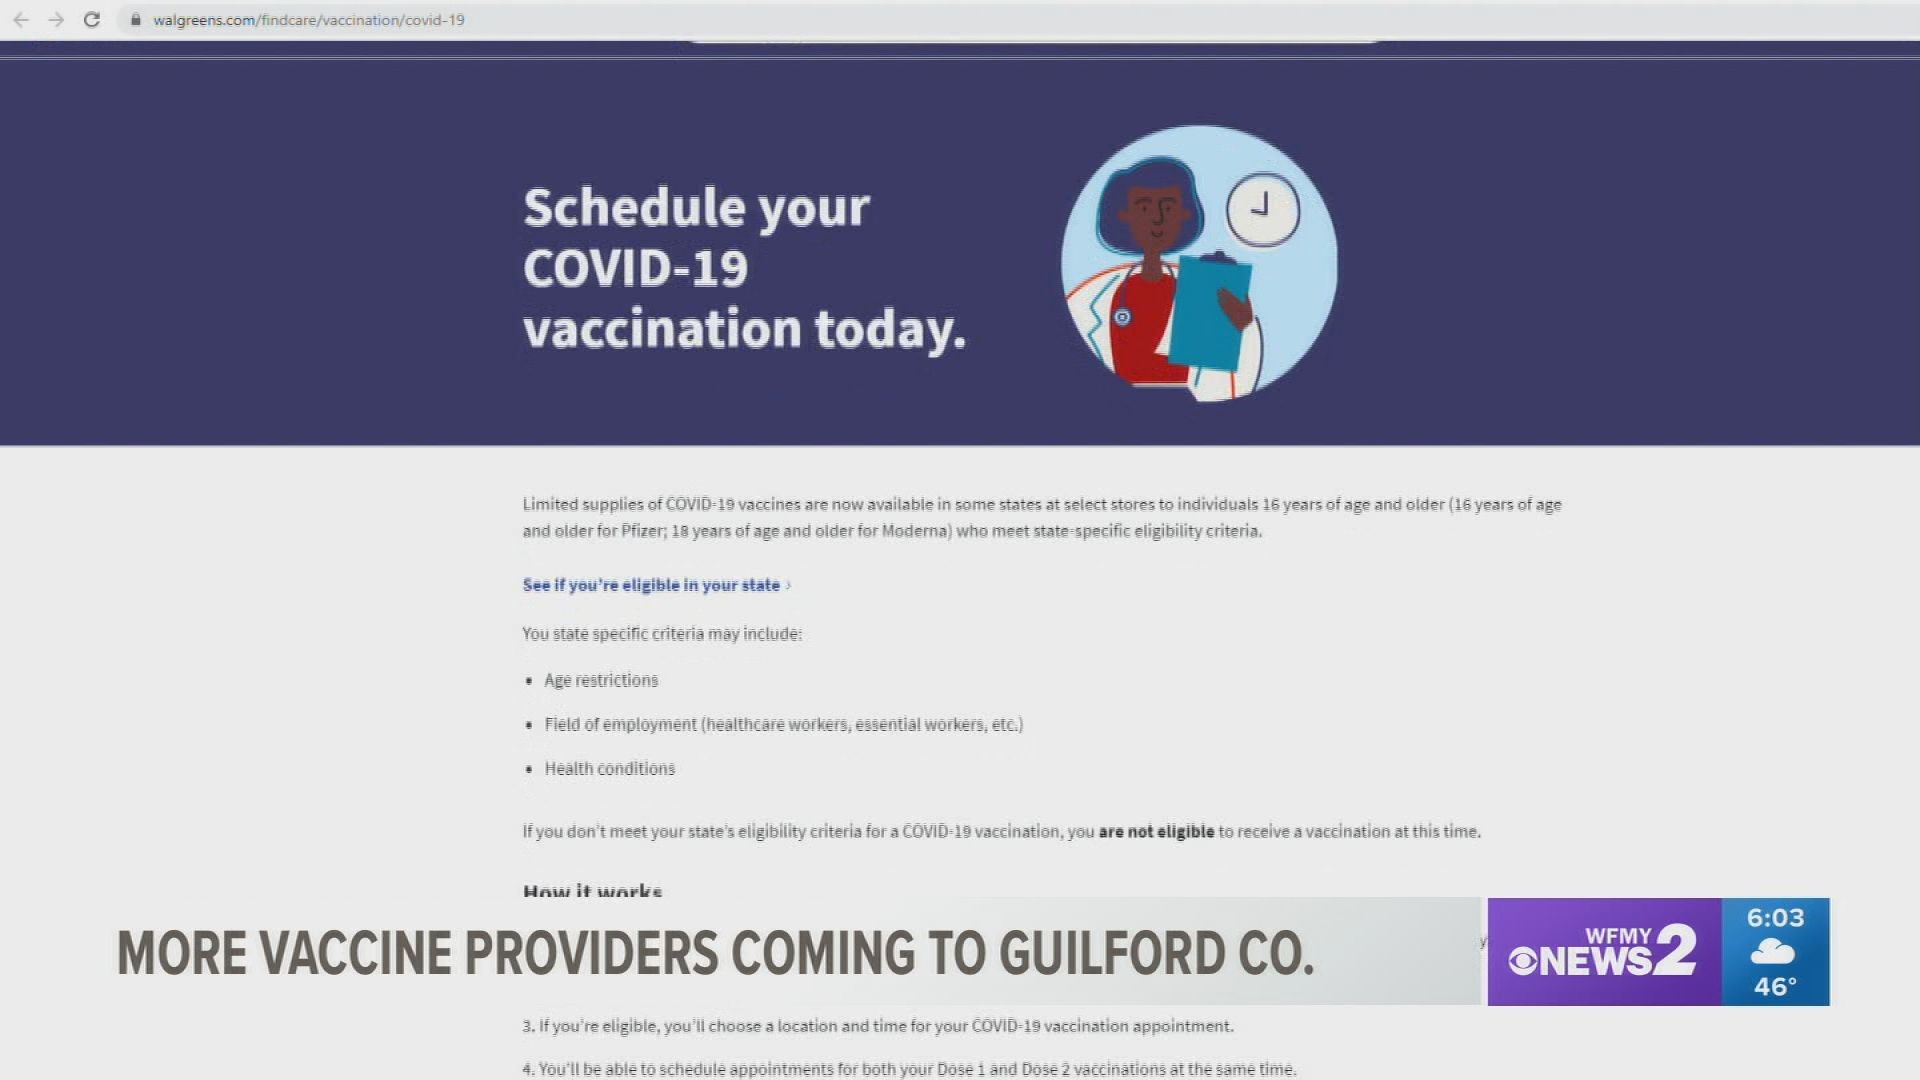 19 Walgreens locations will service Guilford County residents in need of the COVID-19 vaccine. NC A&T will also open as a vaccination site.